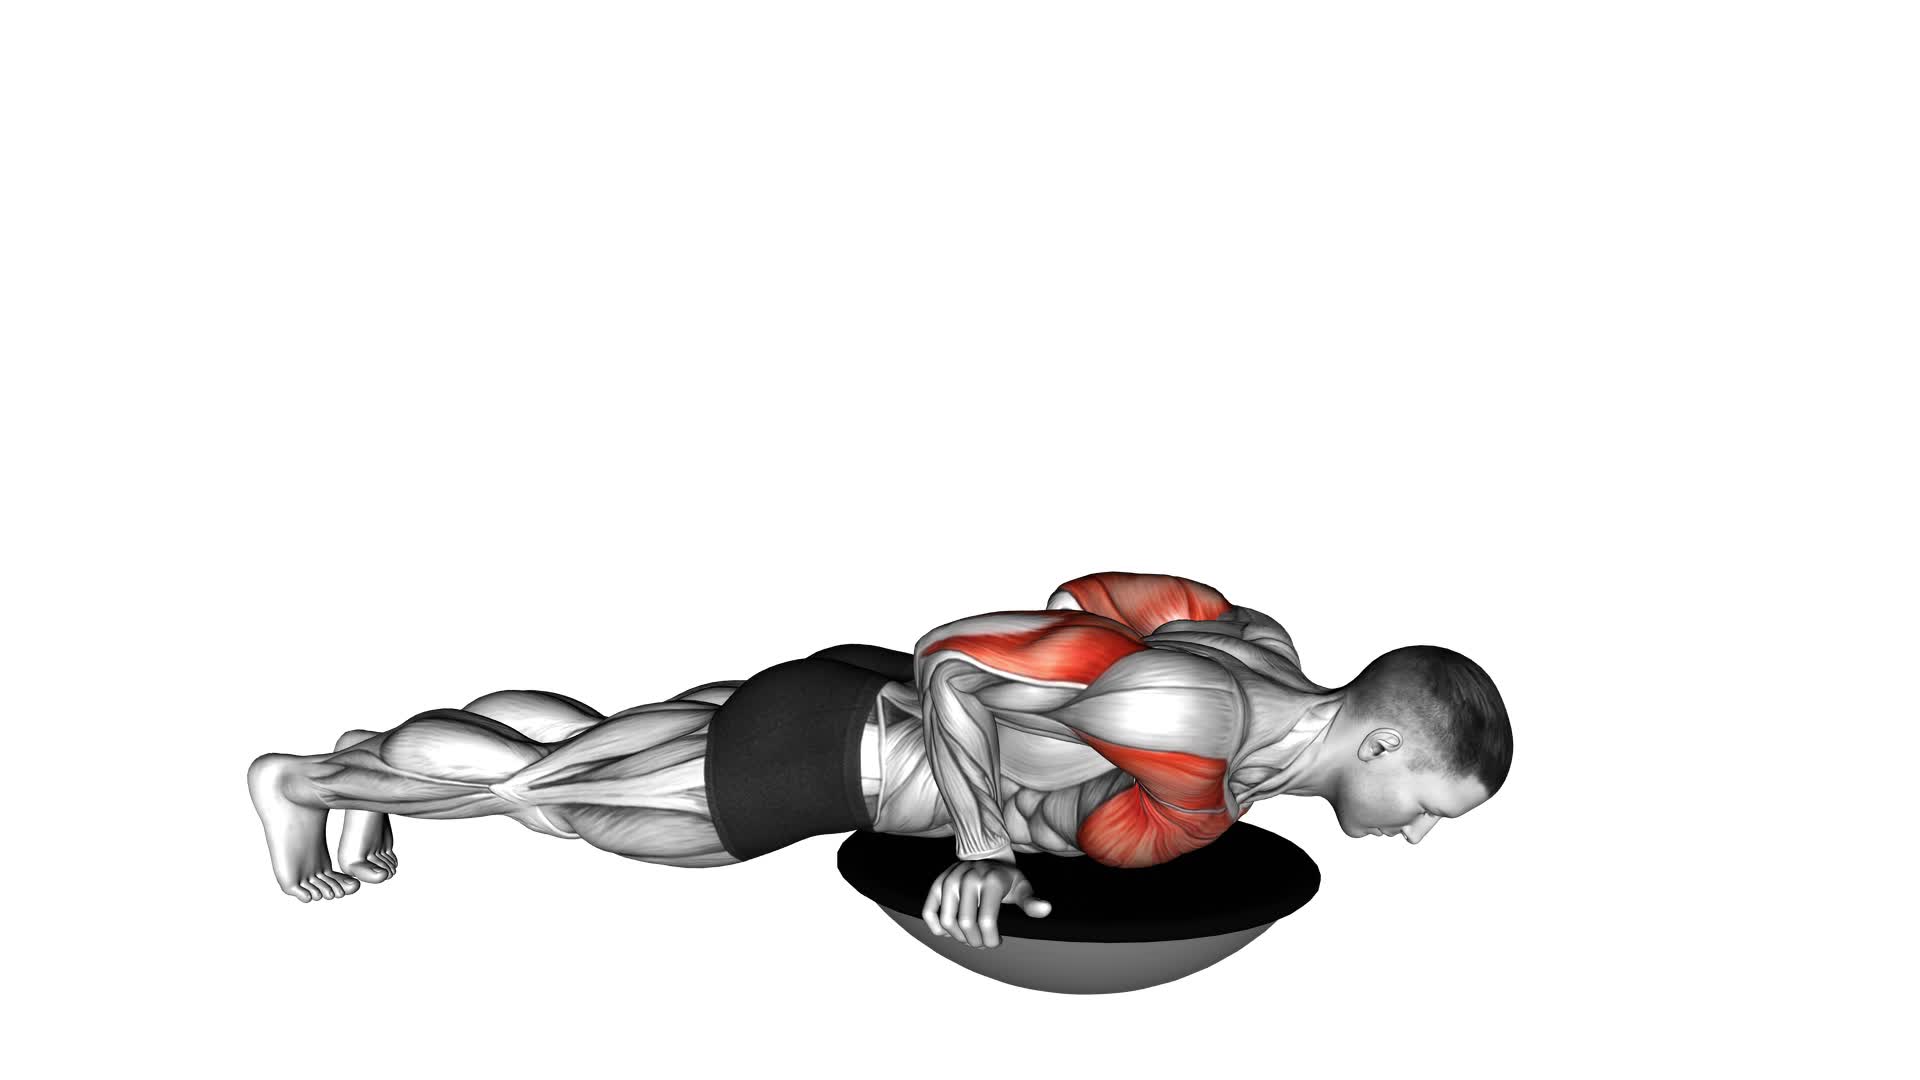 Push-Up (Bosu Ball) - Video Exercise Guide & Tips